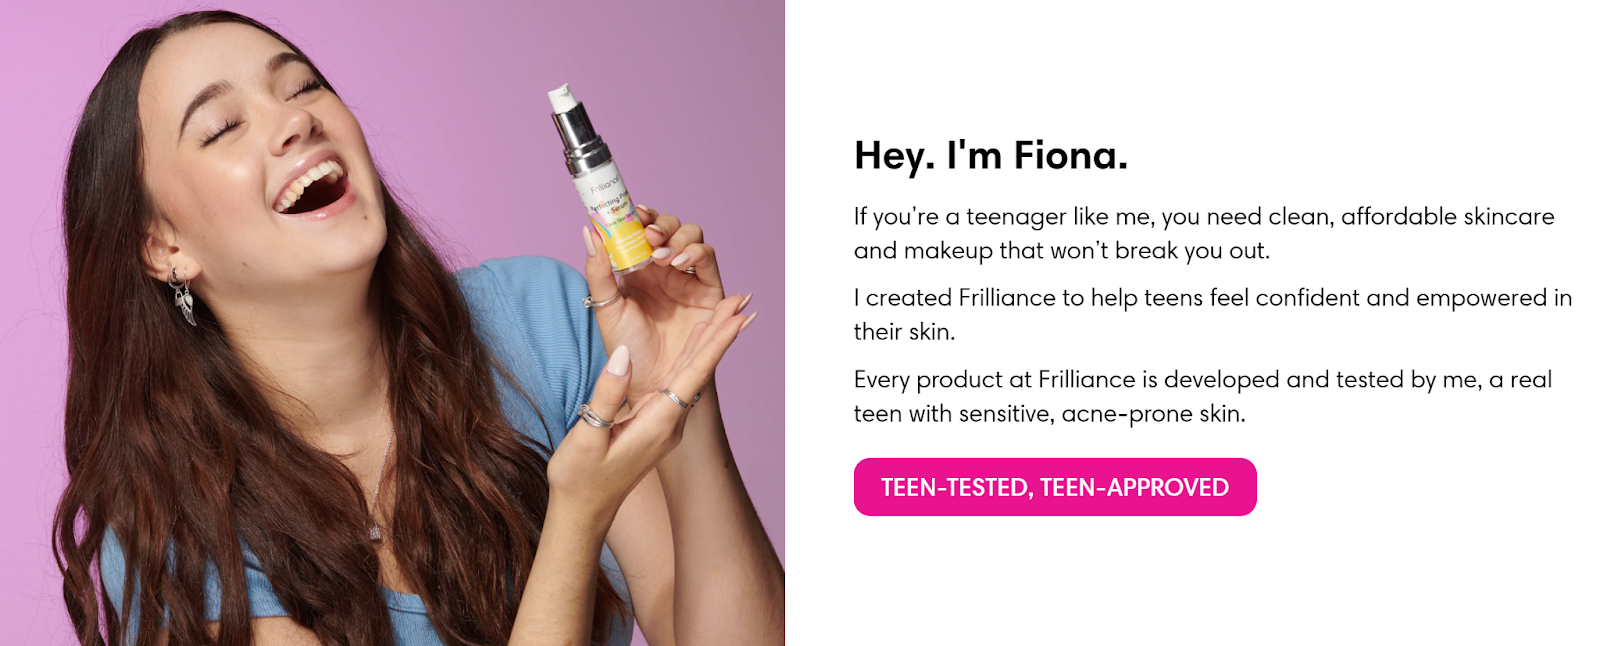 Fiona Frills, CEO of Frilliance, on the Power of Gen Z and Influencer Marketing